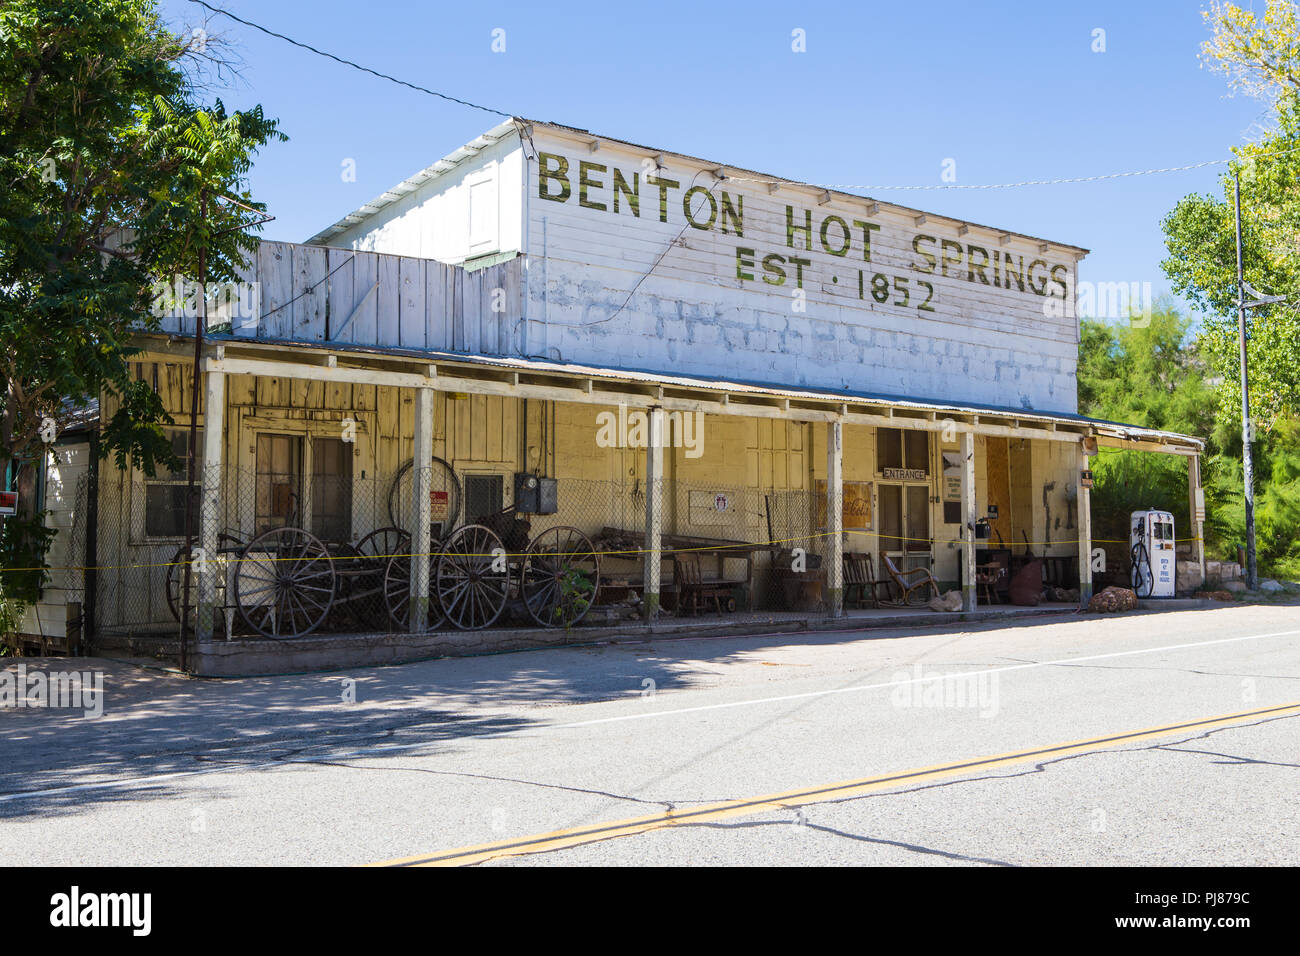 Exterior view of Benton Hot springs old general store and Former Wells Fargo Agency building on Highway 120 California USA Stock Photo